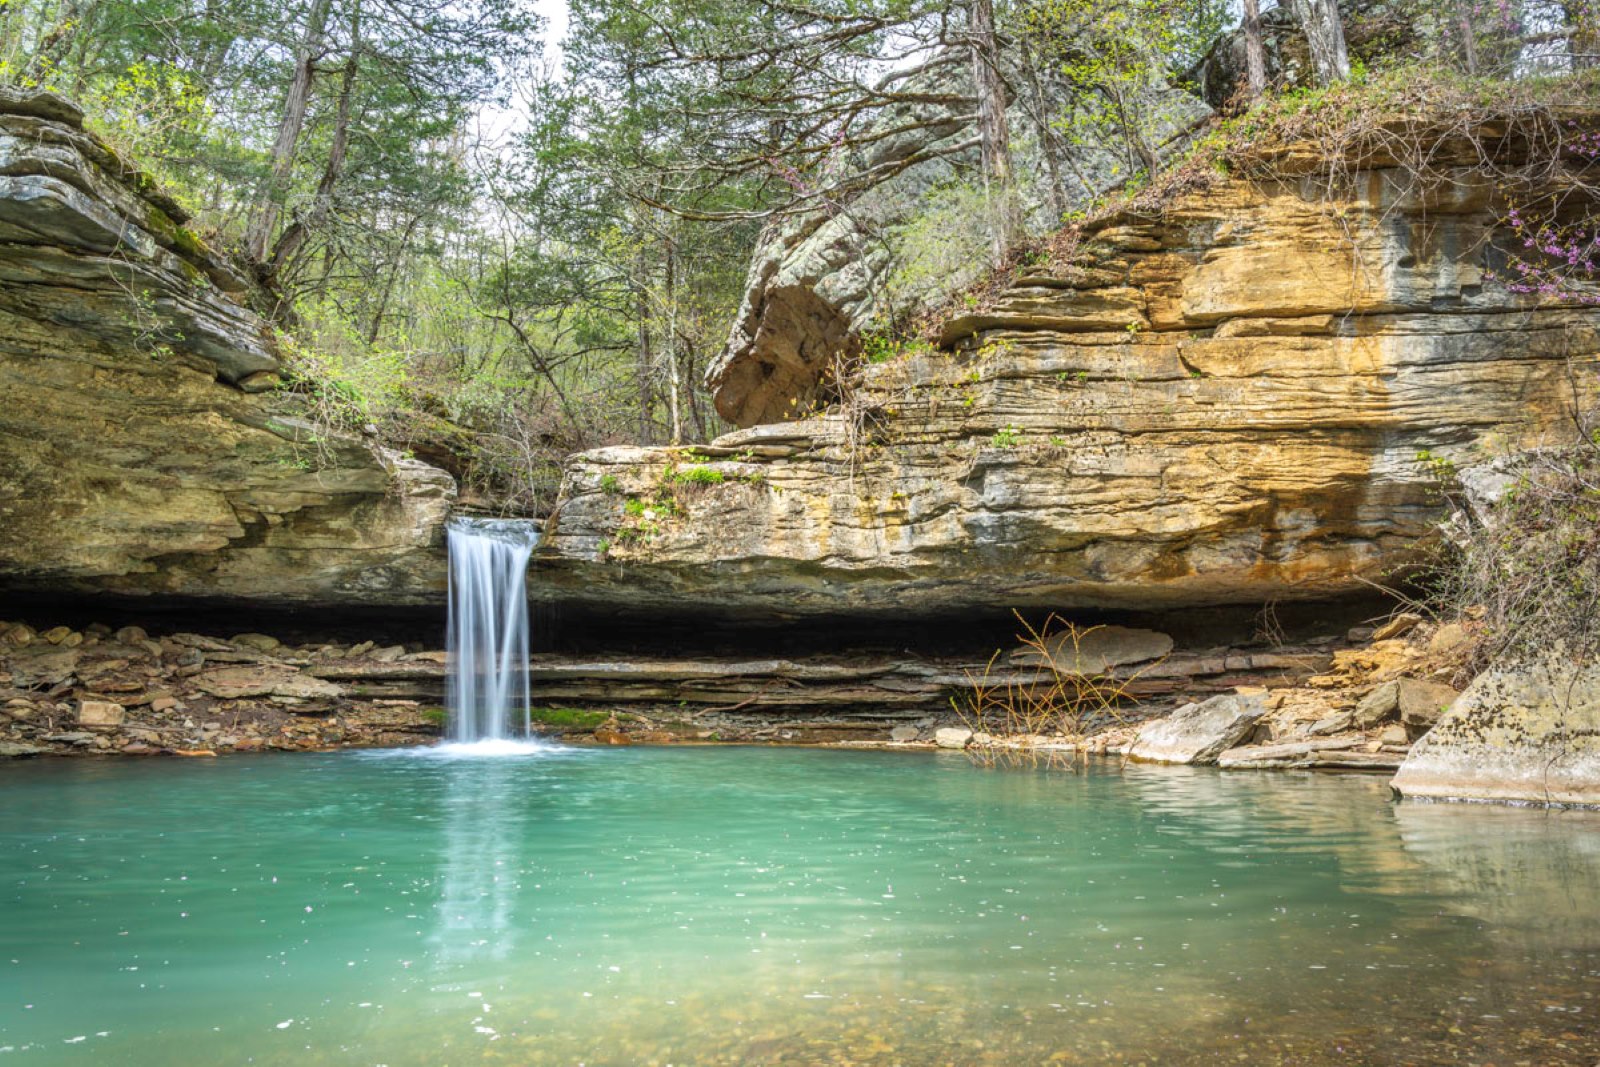 The 8-foot Paige Falls is one of two easy-to-reach waterfalls near the Buffalo National River in northwest Arkansas. (Photo by Sony Hocklander)